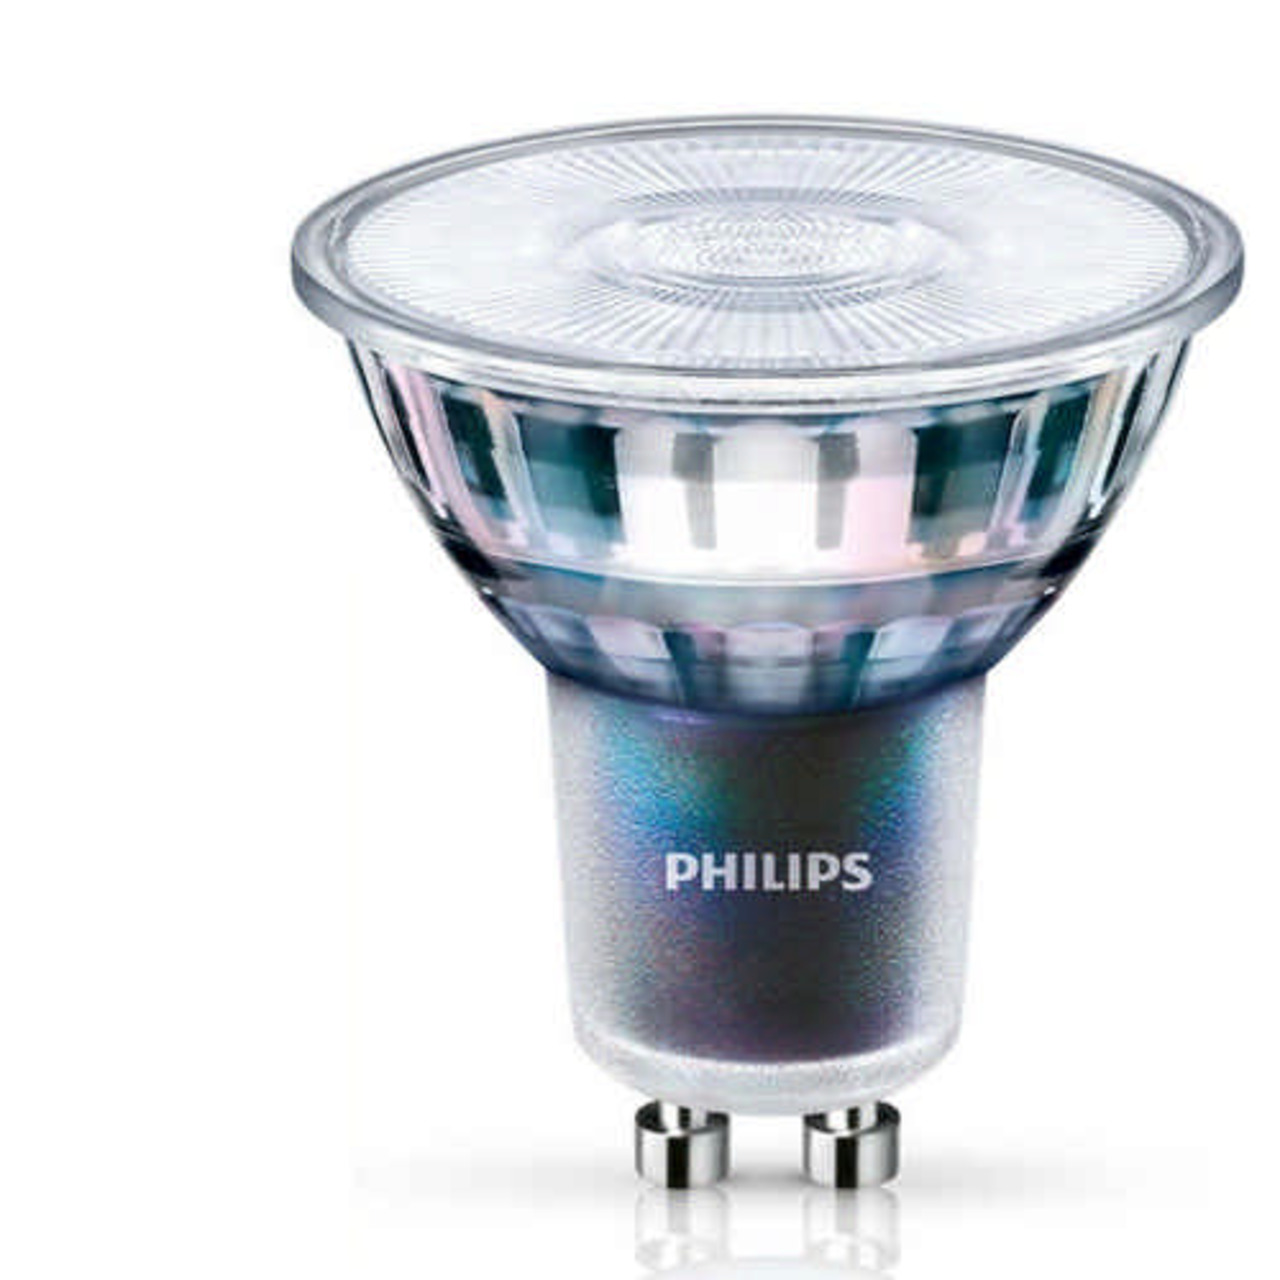 Philips MASTER ExpertColor 5-5-W-GU10-LED-Lampe- 400 lm- 97 Ra- 25- 4000K- neutralweiss- dimmbar